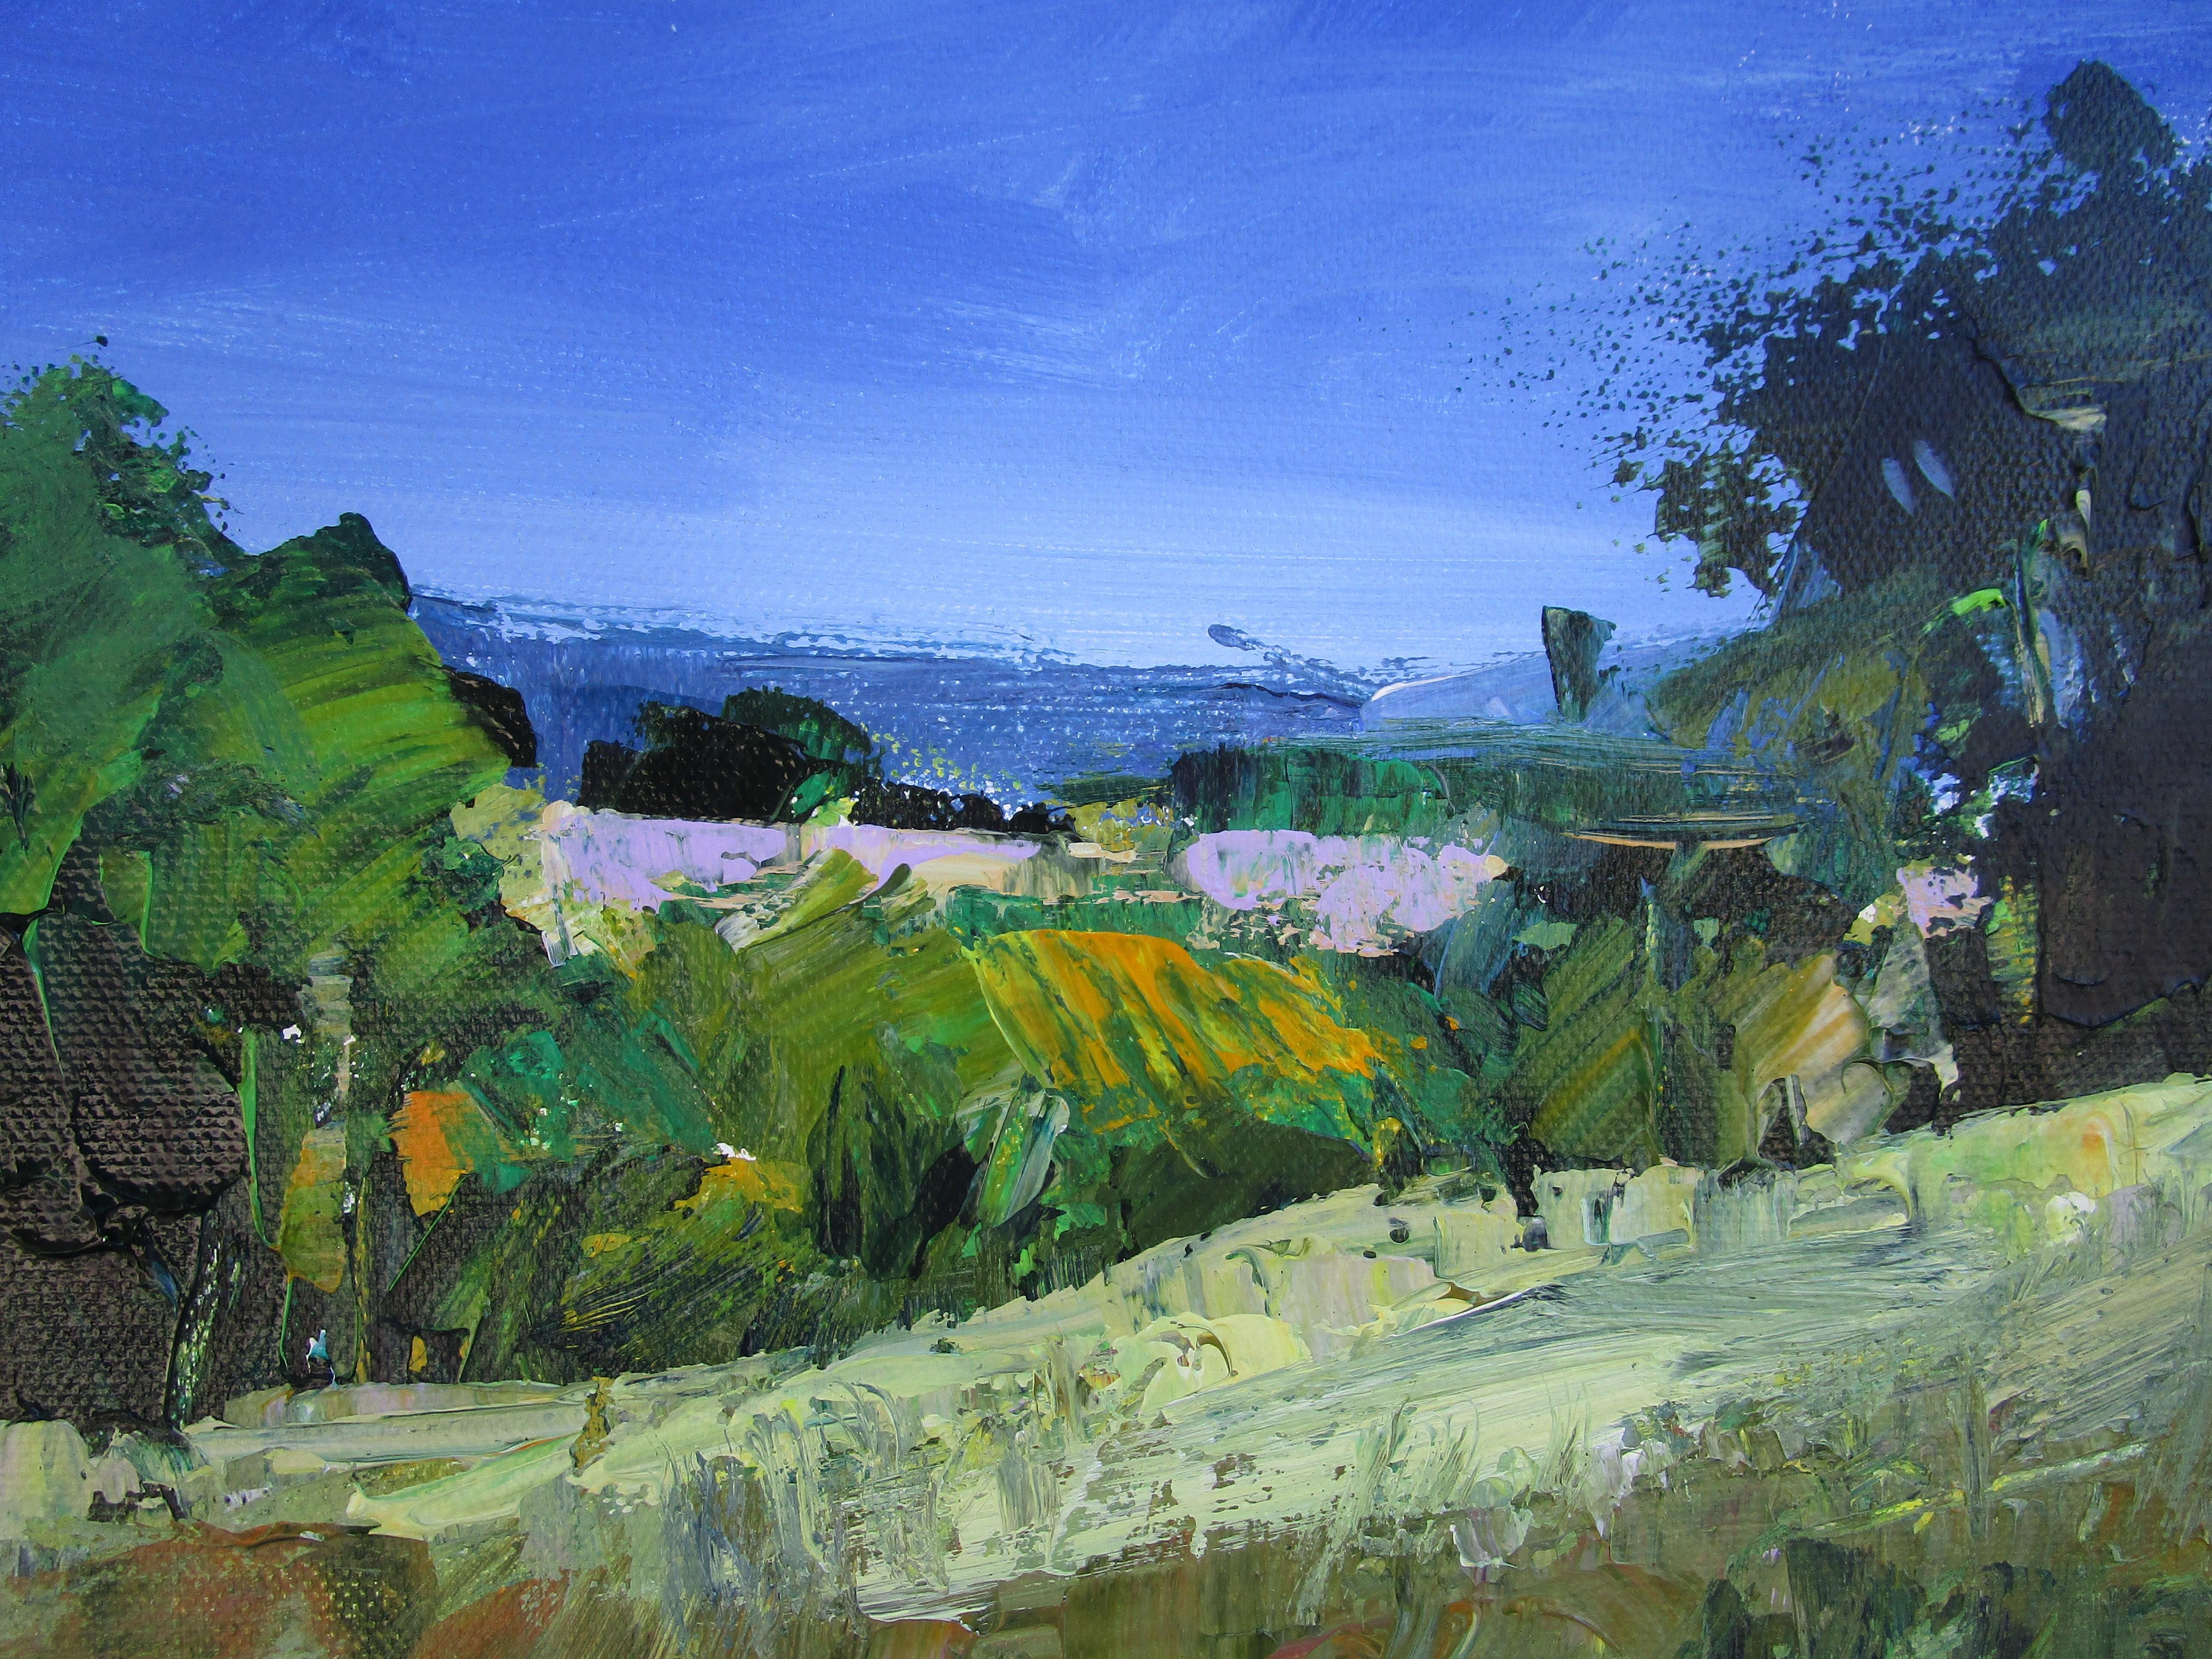 <p>Artist Comments<br>Artist Janet Dyer displays an impressionistic landscape of lush lavender fields in Provence, France. Expressive strokes in bold shades of green and hints of golden yellow establish the dense summer foliage. Trees line up at the